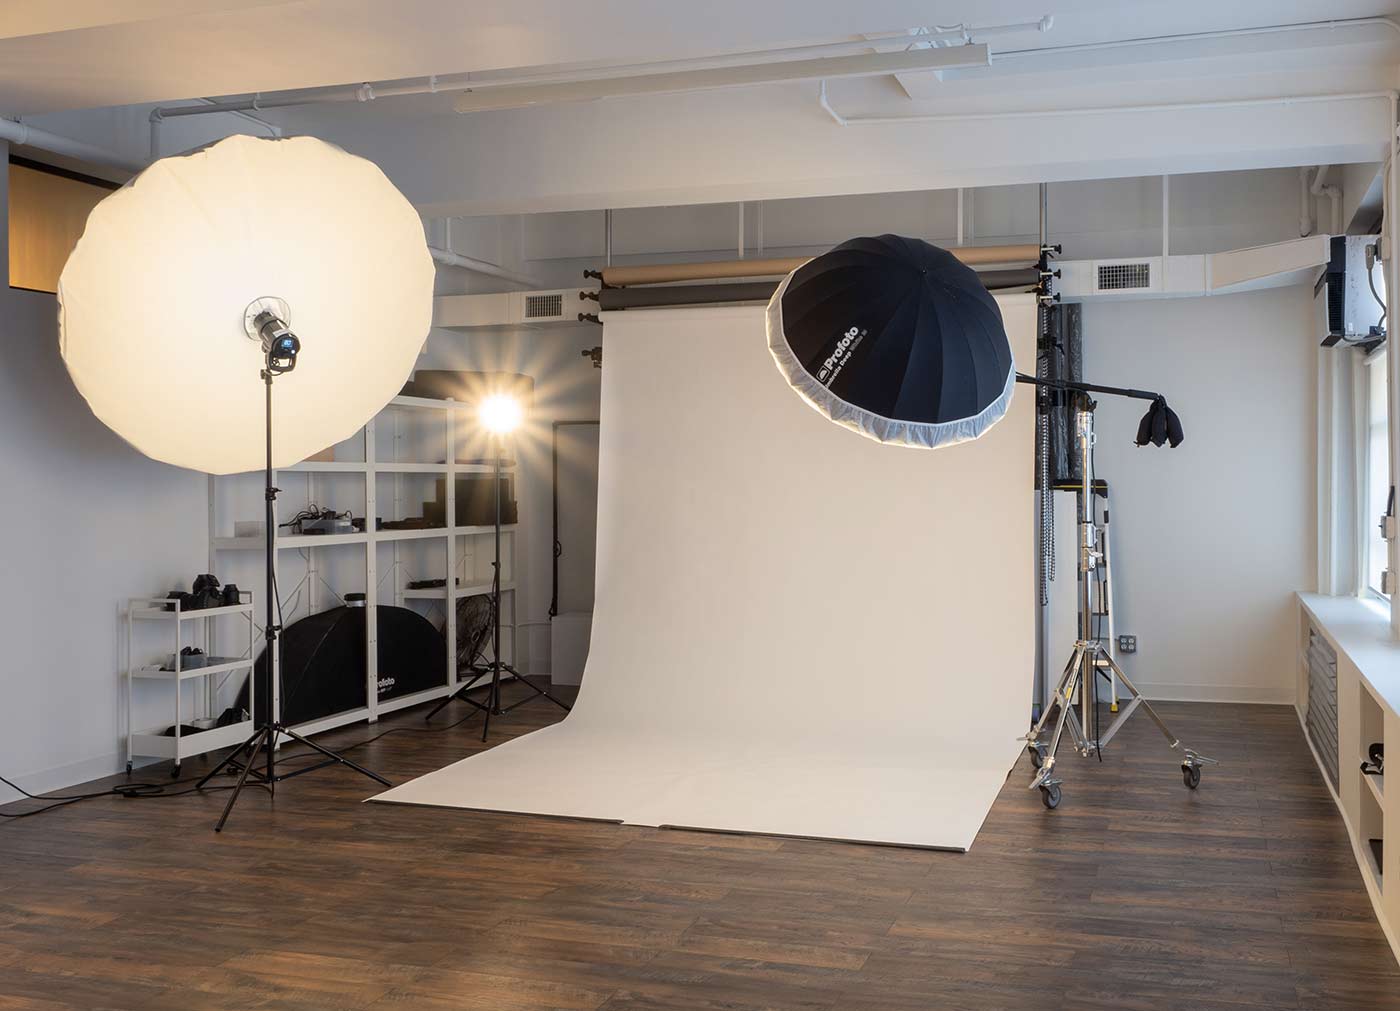 Interior of a NYC photography studio, showing a white seamless backdrop, and a variety of flash strobes mounted on stands.